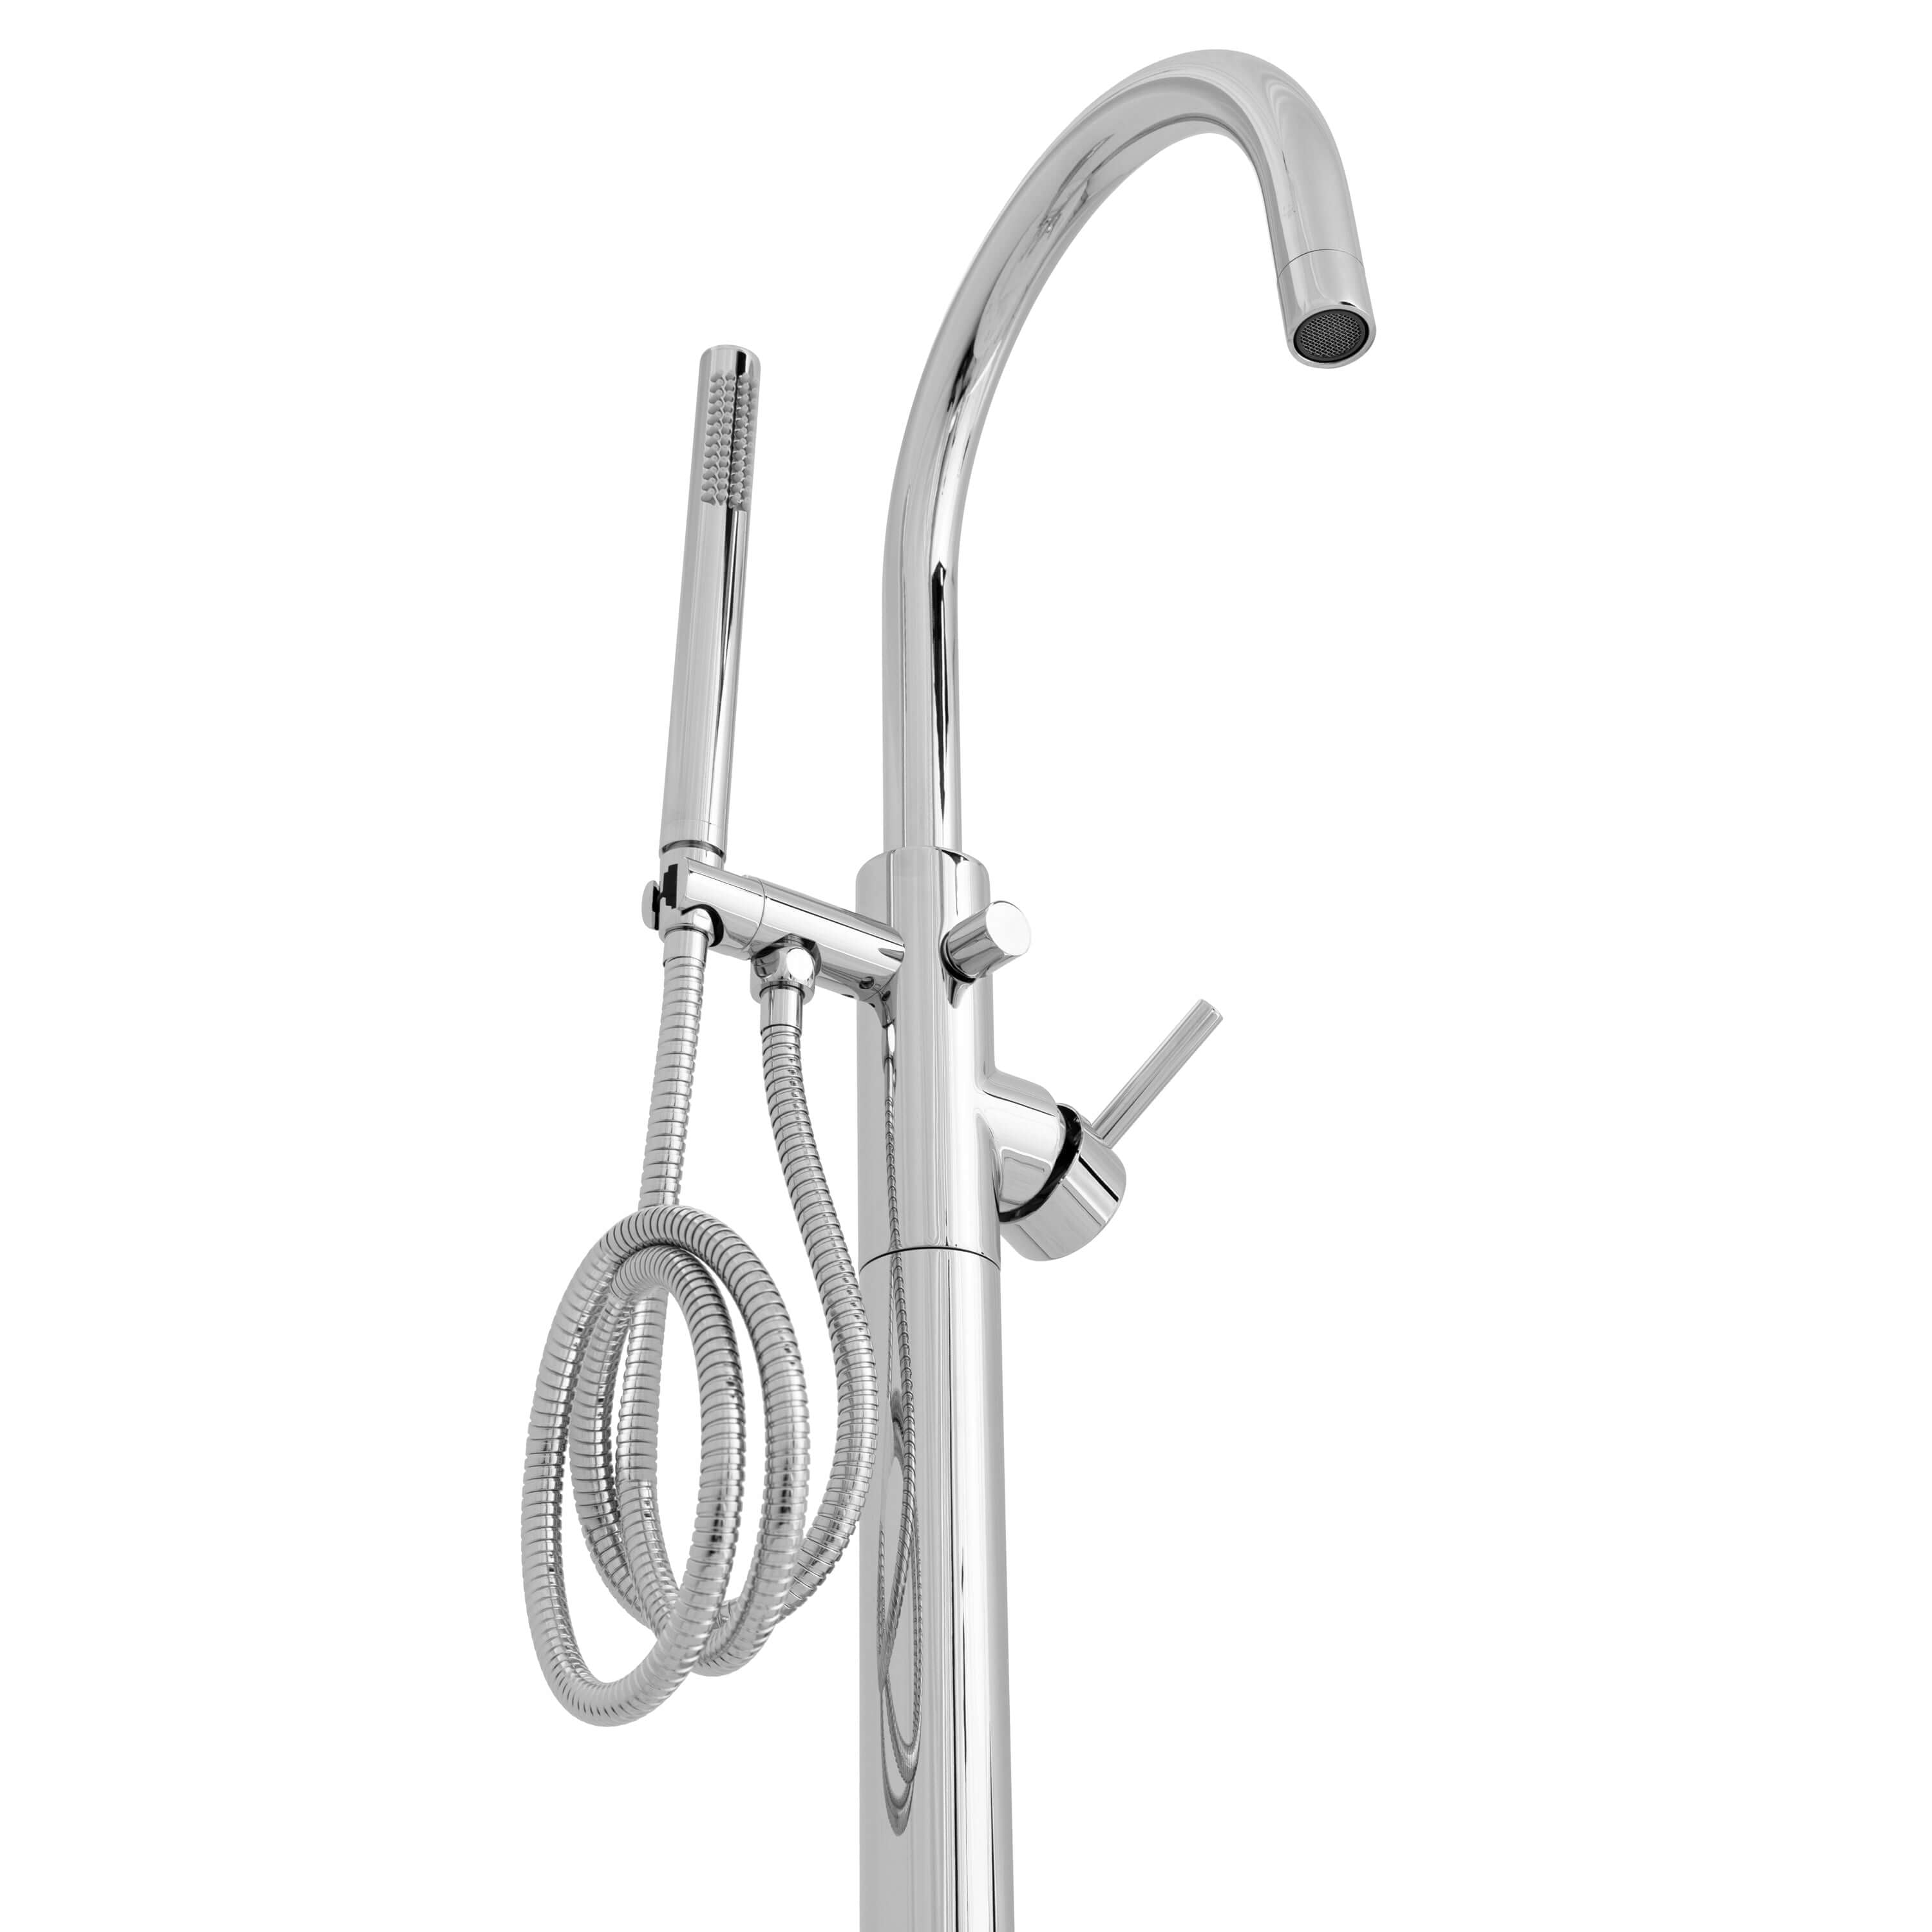 ZLINE Emerald Bay Bath Tub Filler in Chrome faucet and handle detail